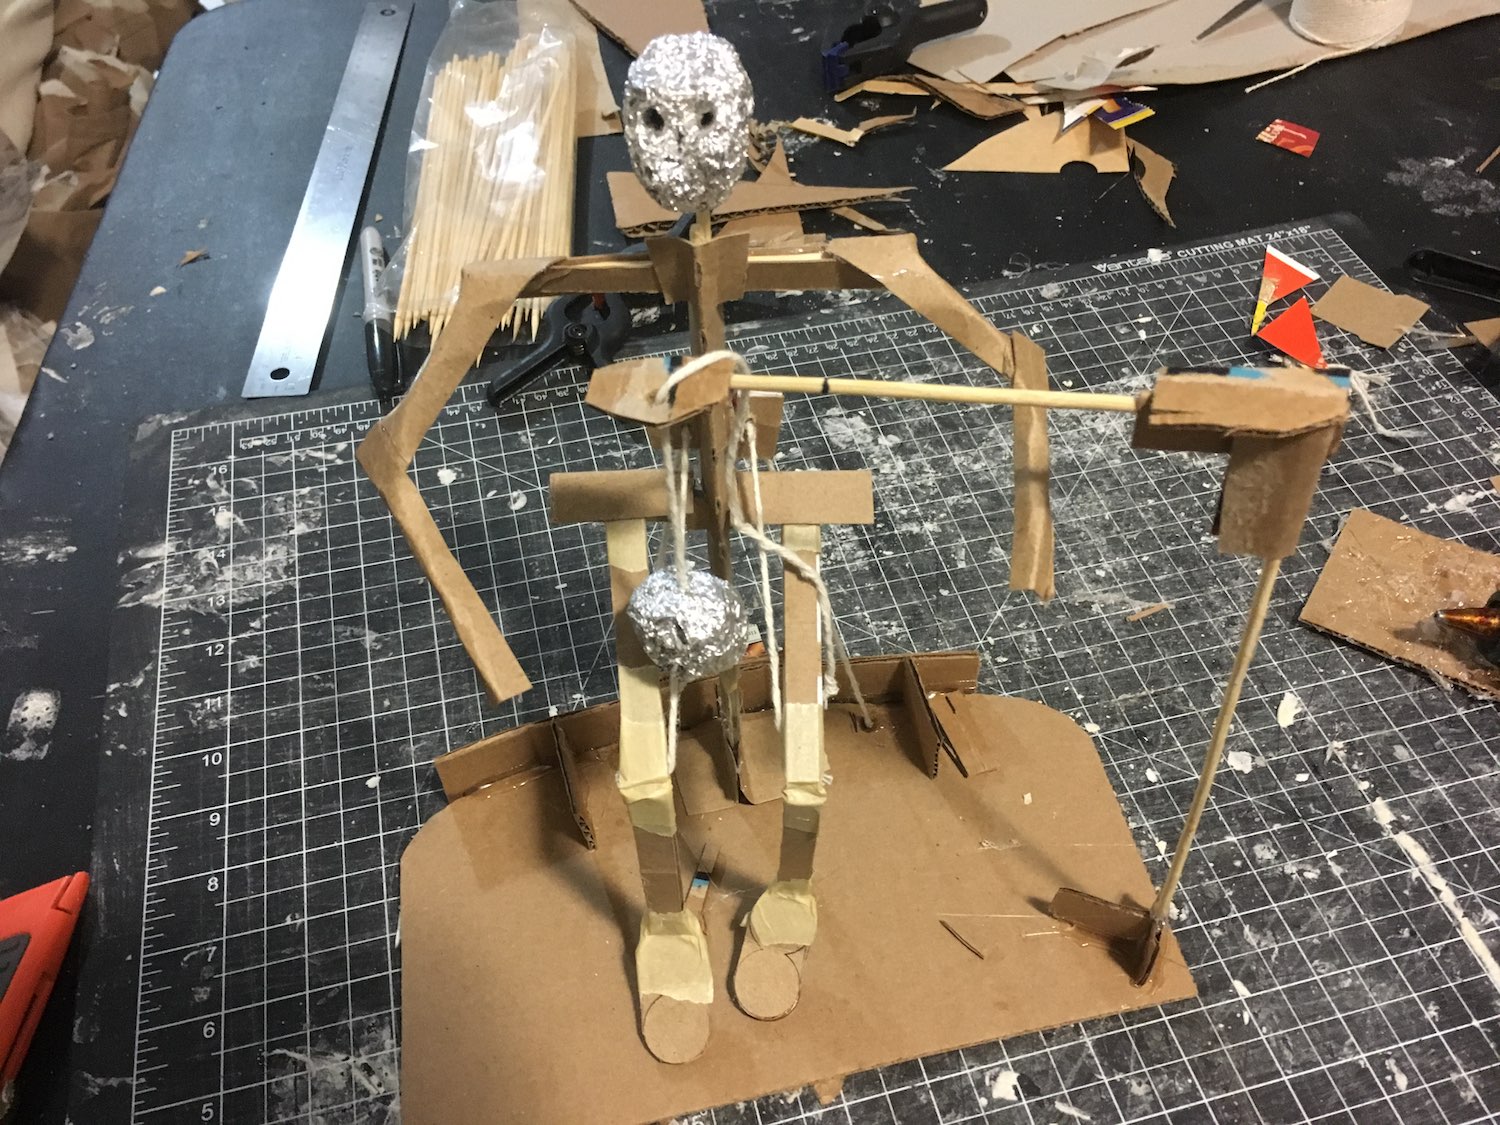 A small cardboard skeleton with a skull floating in front of it